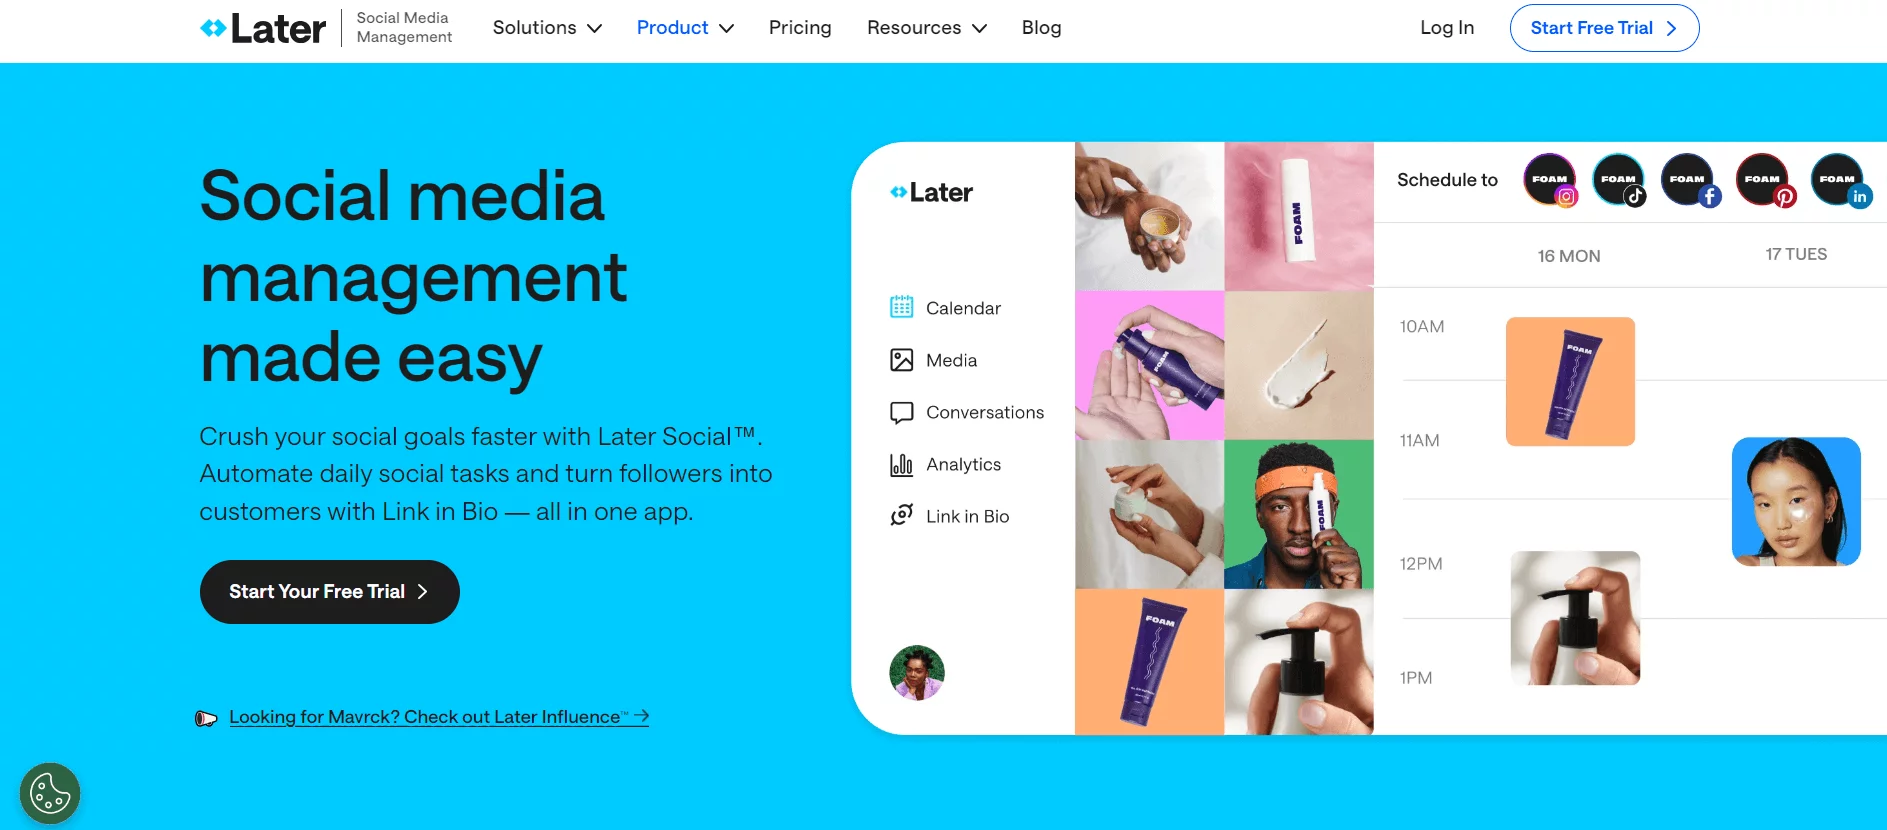 Homepage of Later showcasing their social media management platform, with features like scheduling, media management, and analytics displayed alongside user-friendly interface examples.